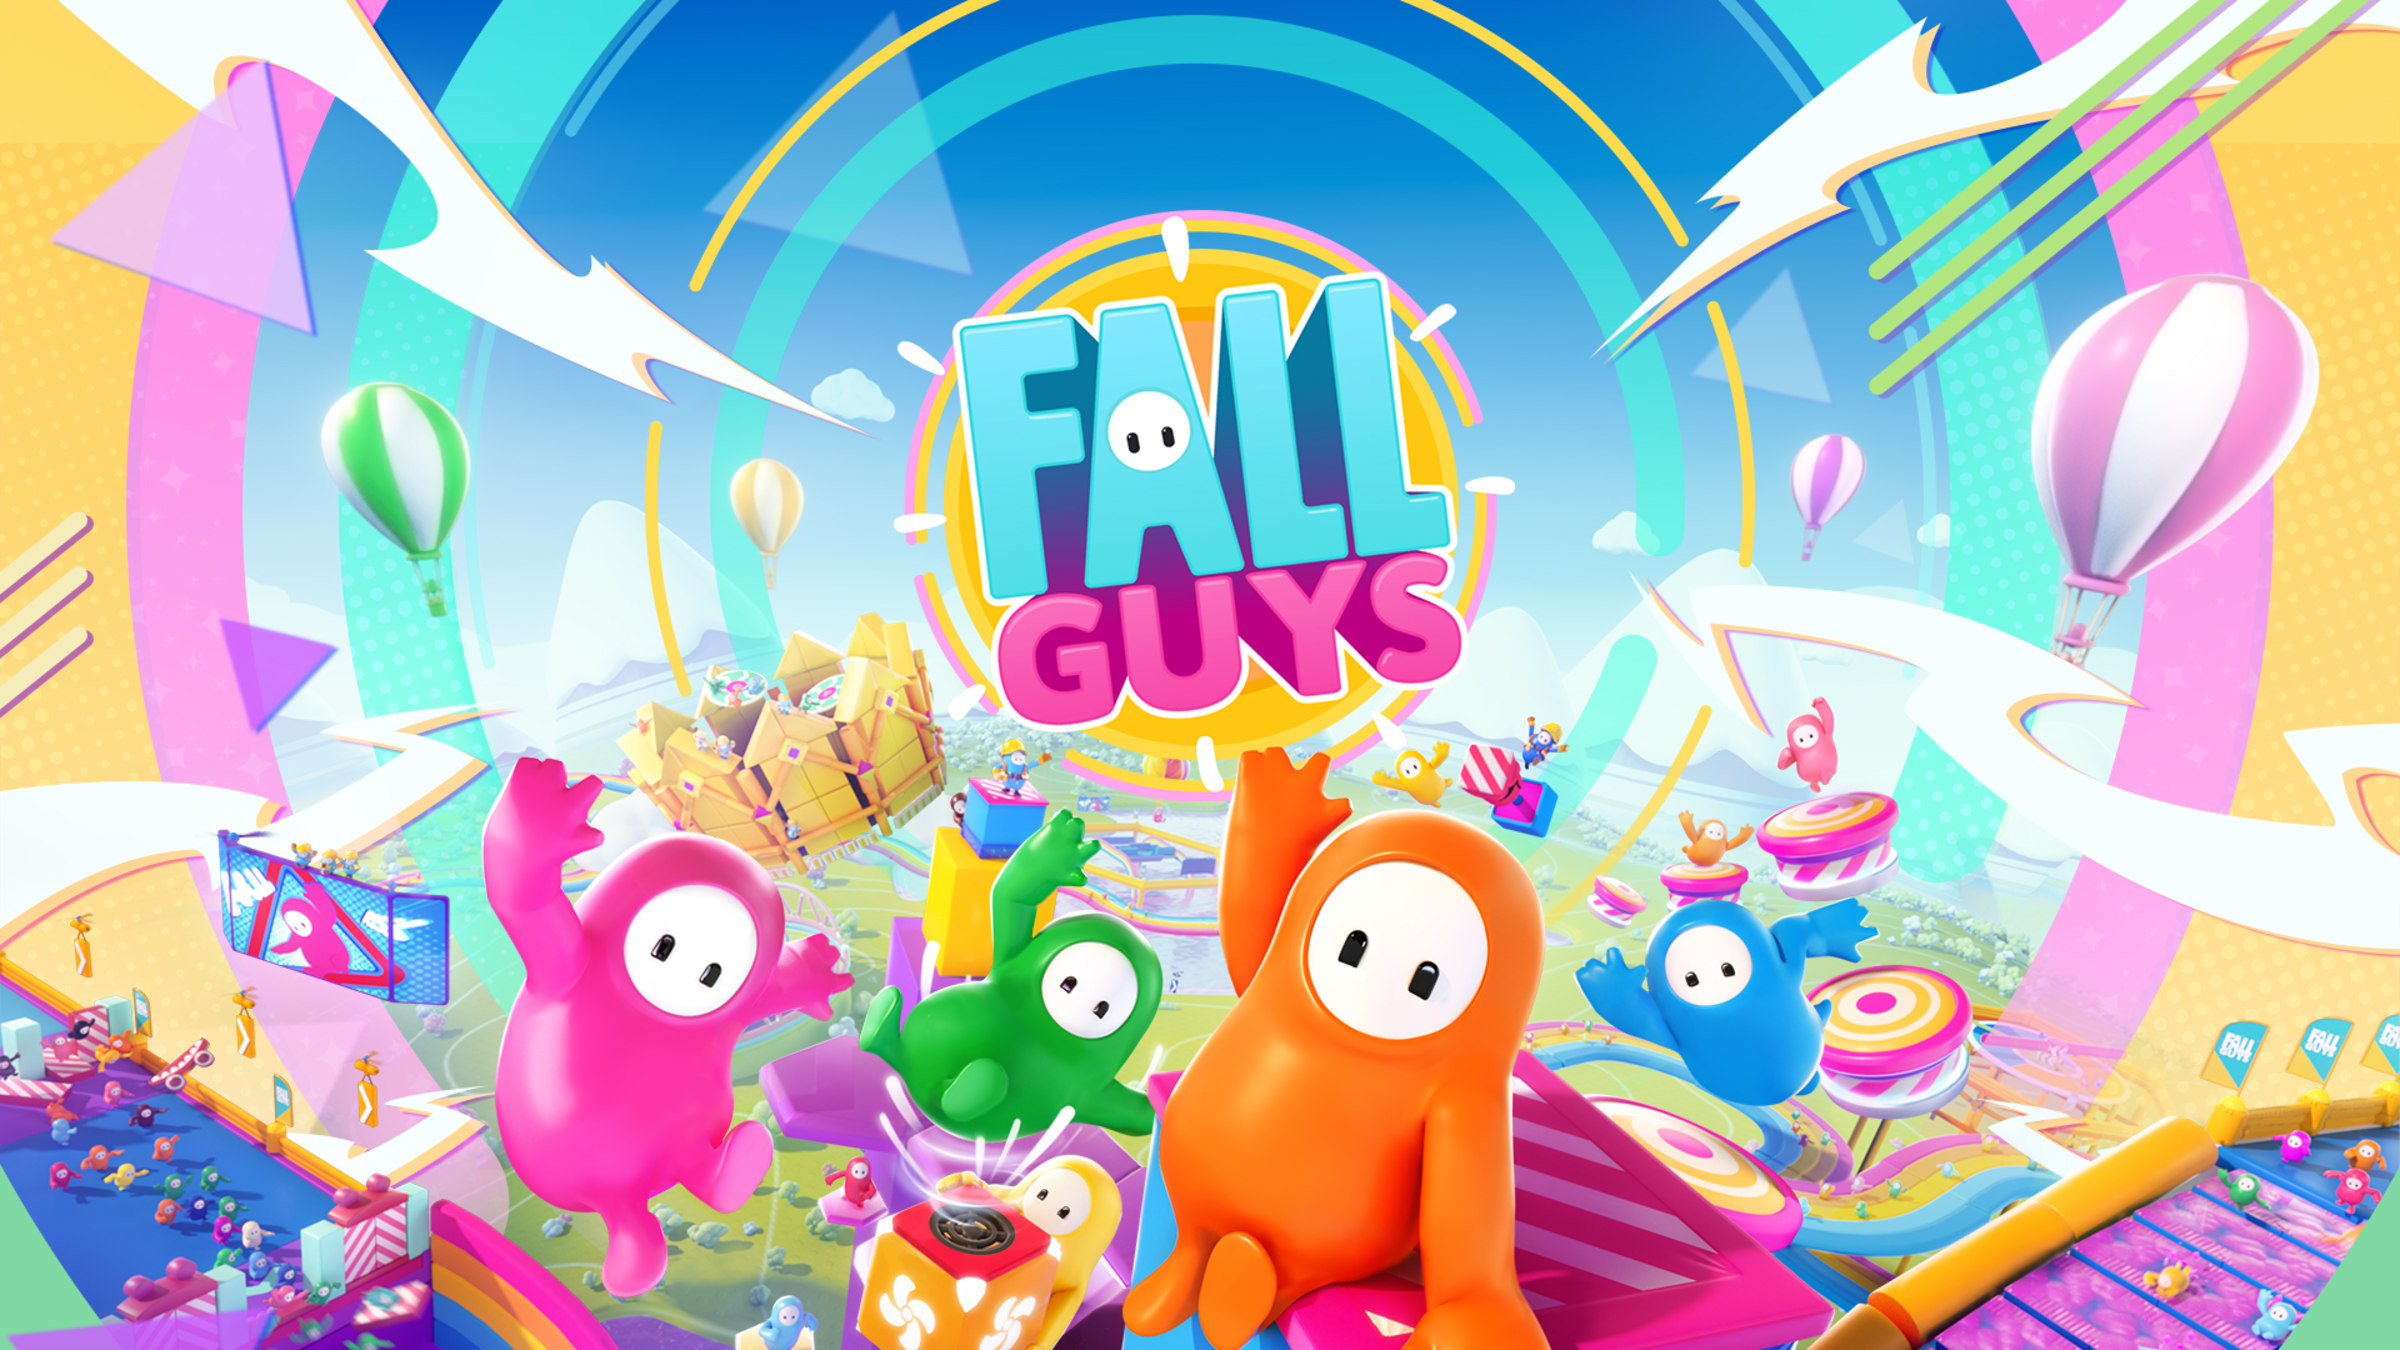 Fall Guys - 'Free For All' Gameplay Trailer - Nintendo Switch 